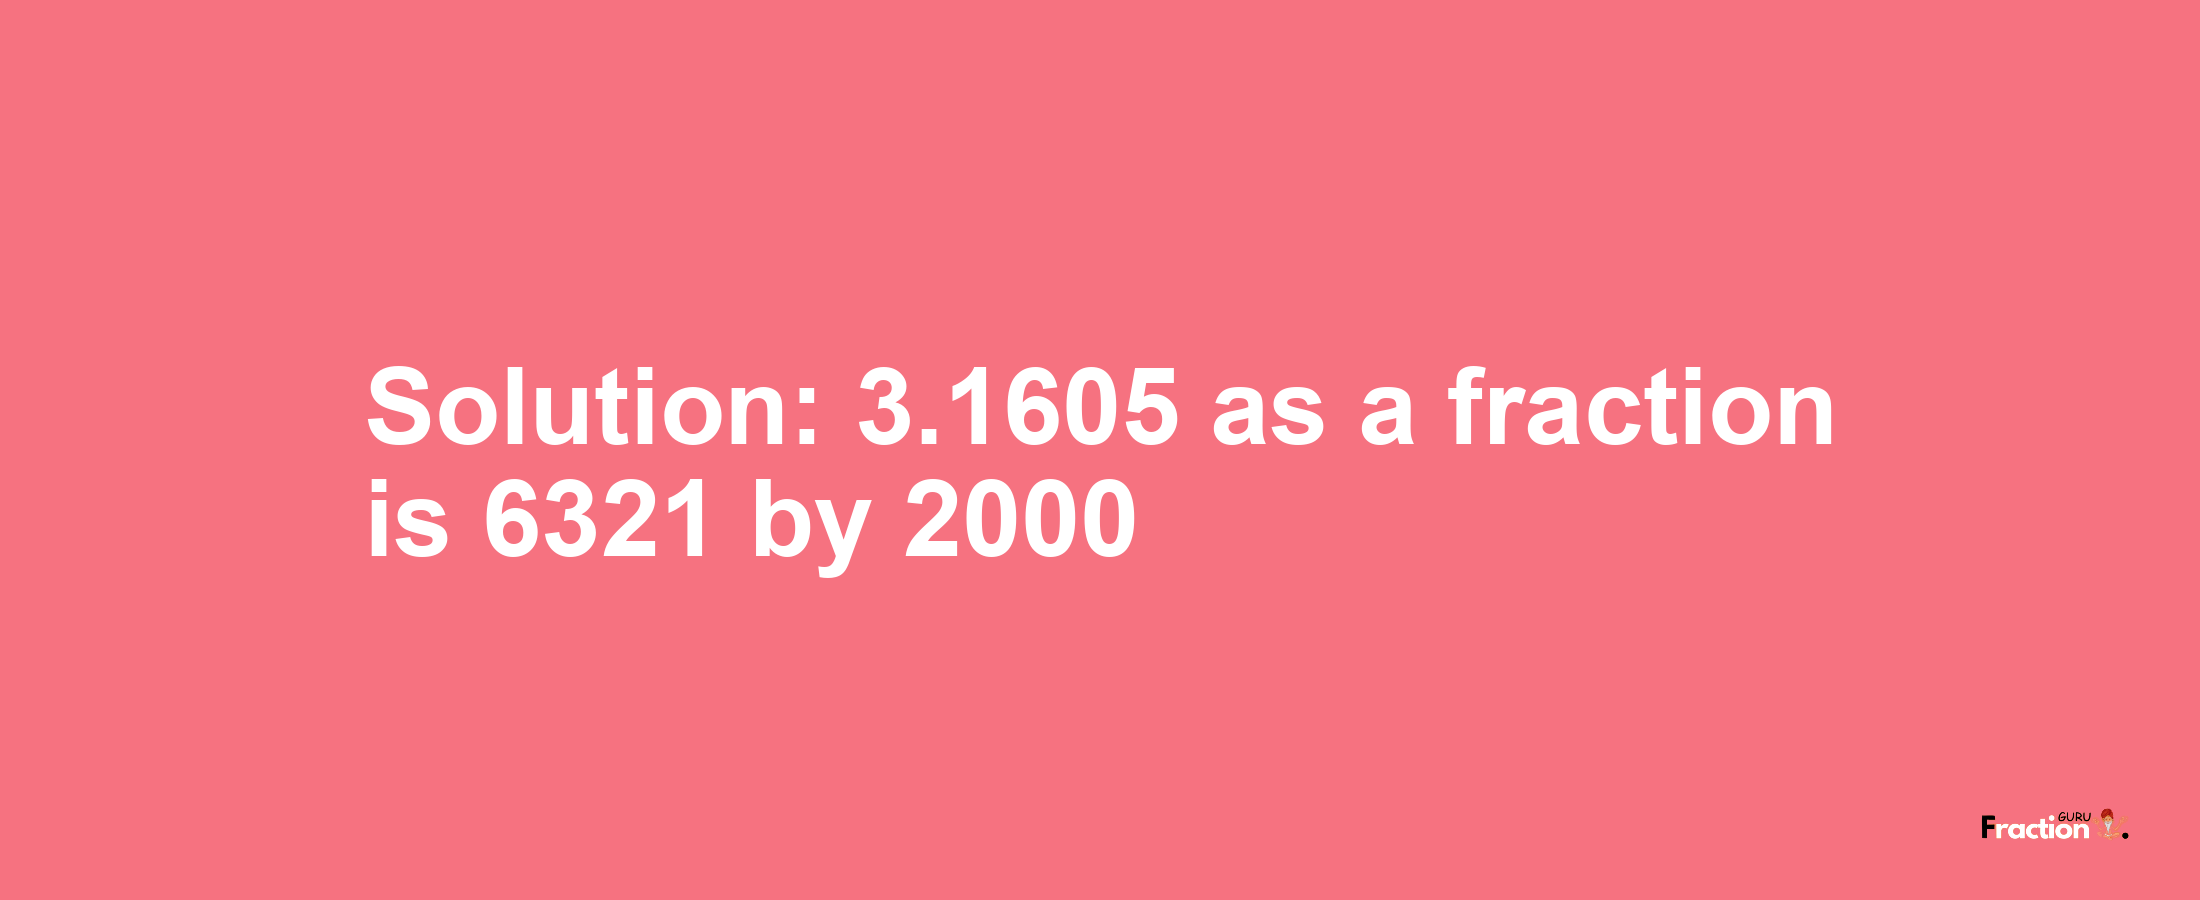 Solution:3.1605 as a fraction is 6321/2000